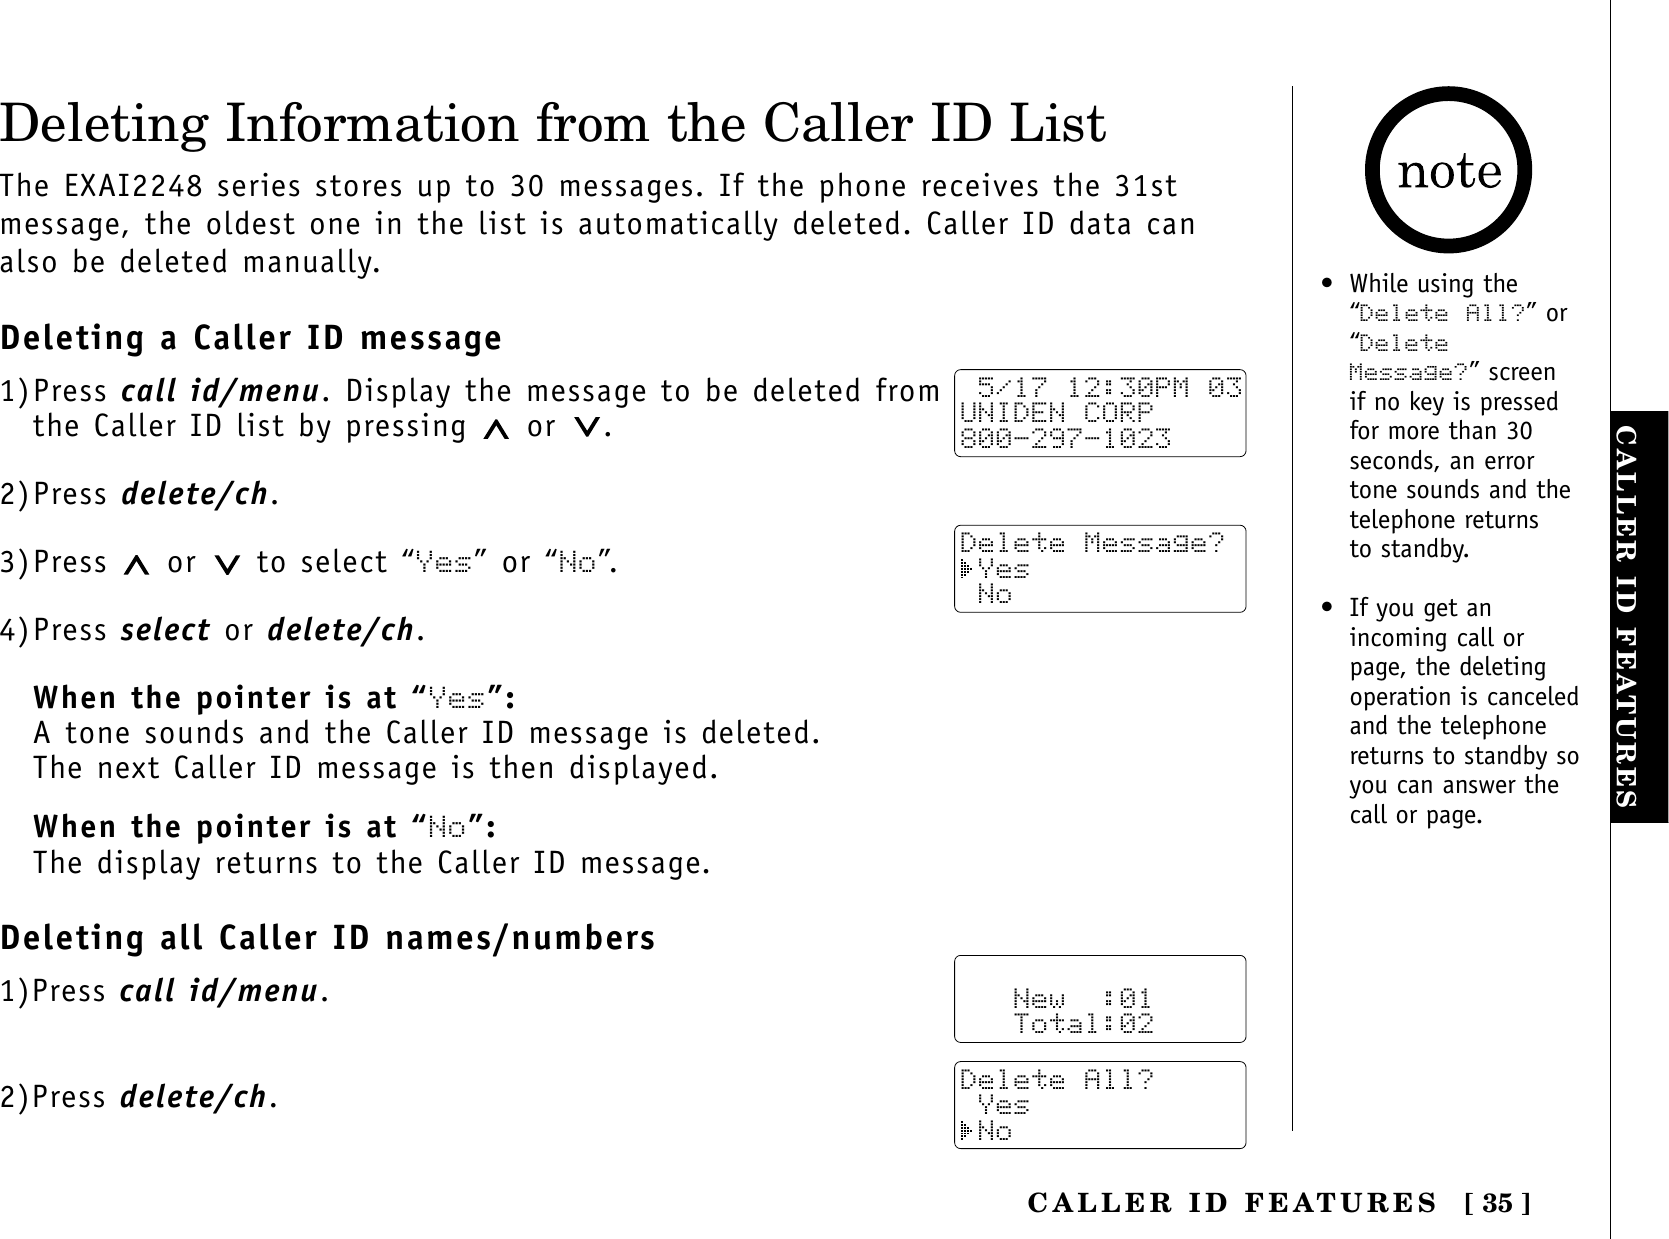 [ 35 ]CALLER ID FEATURESCALLER ID FEATURESDeleting Information from the Caller ID ListThe EXAI2248 series stores up to 30 messages. If the phone receives the 31stmessage, the oldest one in the list is automatically deleted. Caller ID data canalso be deleted manually.Deleting a Caller ID message1)Press call id/menu. Display the message to be deleted from the Caller ID list by pressing  or .2)Press delete/ch.3)Press  or to select “Yes” or “No”.4)Press select or delete/ch.When the pointer is at “Yes”:A tone sounds and the Caller ID message is deleted. The next Caller ID message is then displayed.When the pointer is at “No”:The display returns to the Caller ID message.Deleting all Caller ID names/numbers1)Press call id/menu.2)Press delete/ch. 5/17 12:30PM 03UNIDEN CORP800-297-1023Delete Message? Yes No   New  :01   Total:02Delete All? Yes No• While using the“Delete All?” or“DeleteMessage?” screen if no key is pressedfor more than 30seconds, an errortone sounds and thetelephone returns to standby.• If you get anincoming call orpage, the deletingoperation is canceledand the telephonereturns to standby soyou can answer thecall or page.